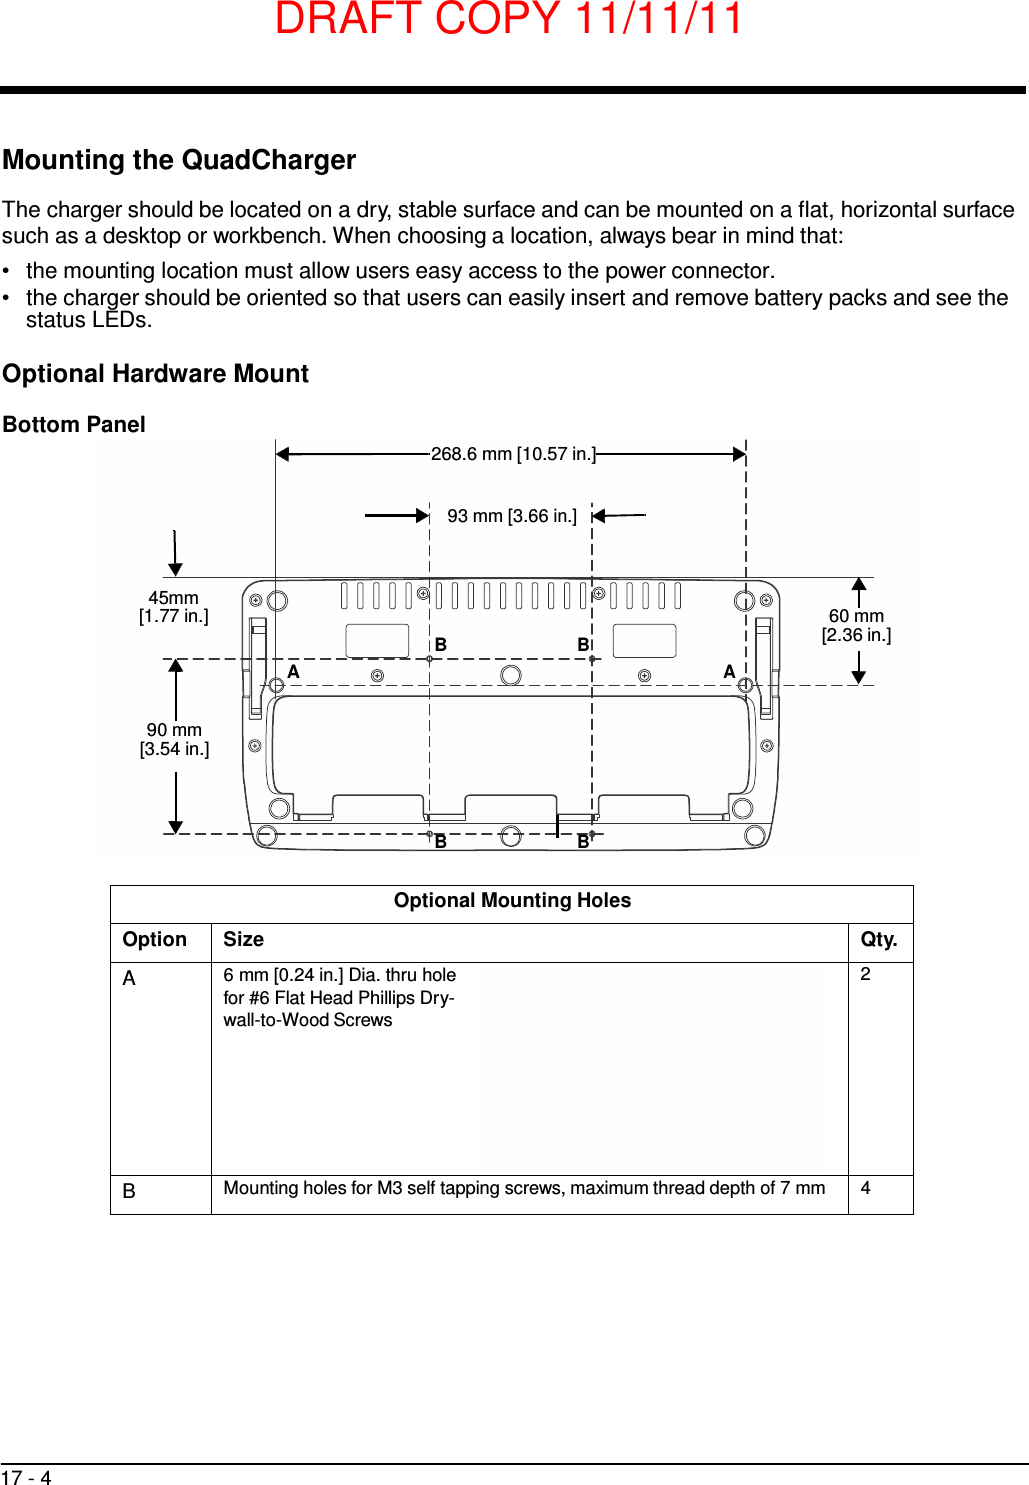 DRAFT COPY 11/11/11 17 - 4      Mounting the QuadCharger  The charger should be located on a dry, stable surface and can be mounted on a flat, horizontal surface such as a desktop or workbench. When choosing a location, always bear in mind that: •   the mounting location must allow users easy access to the power connector. •   the charger should be oriented so that users can easily insert and remove battery packs and see the status LEDs.  Optional Hardware Mount  Bottom Panel  268.6 mm [10.57 in.]   93 mm [3.66 in.]    45mm [1.77 in.] B B A A  60 mm [2.36 in.]   90 mm [3.54 in.]     B B   Optional Mounting Holes Option Size Qty.  A 6 mm [0.24 in.] Dia. thru hole for #6 Flat Head Phillips Dry- wall-to-Wood Screws     2 B Mounting holes for M3 self tapping screws, maximum thread depth of 7 mm 4 